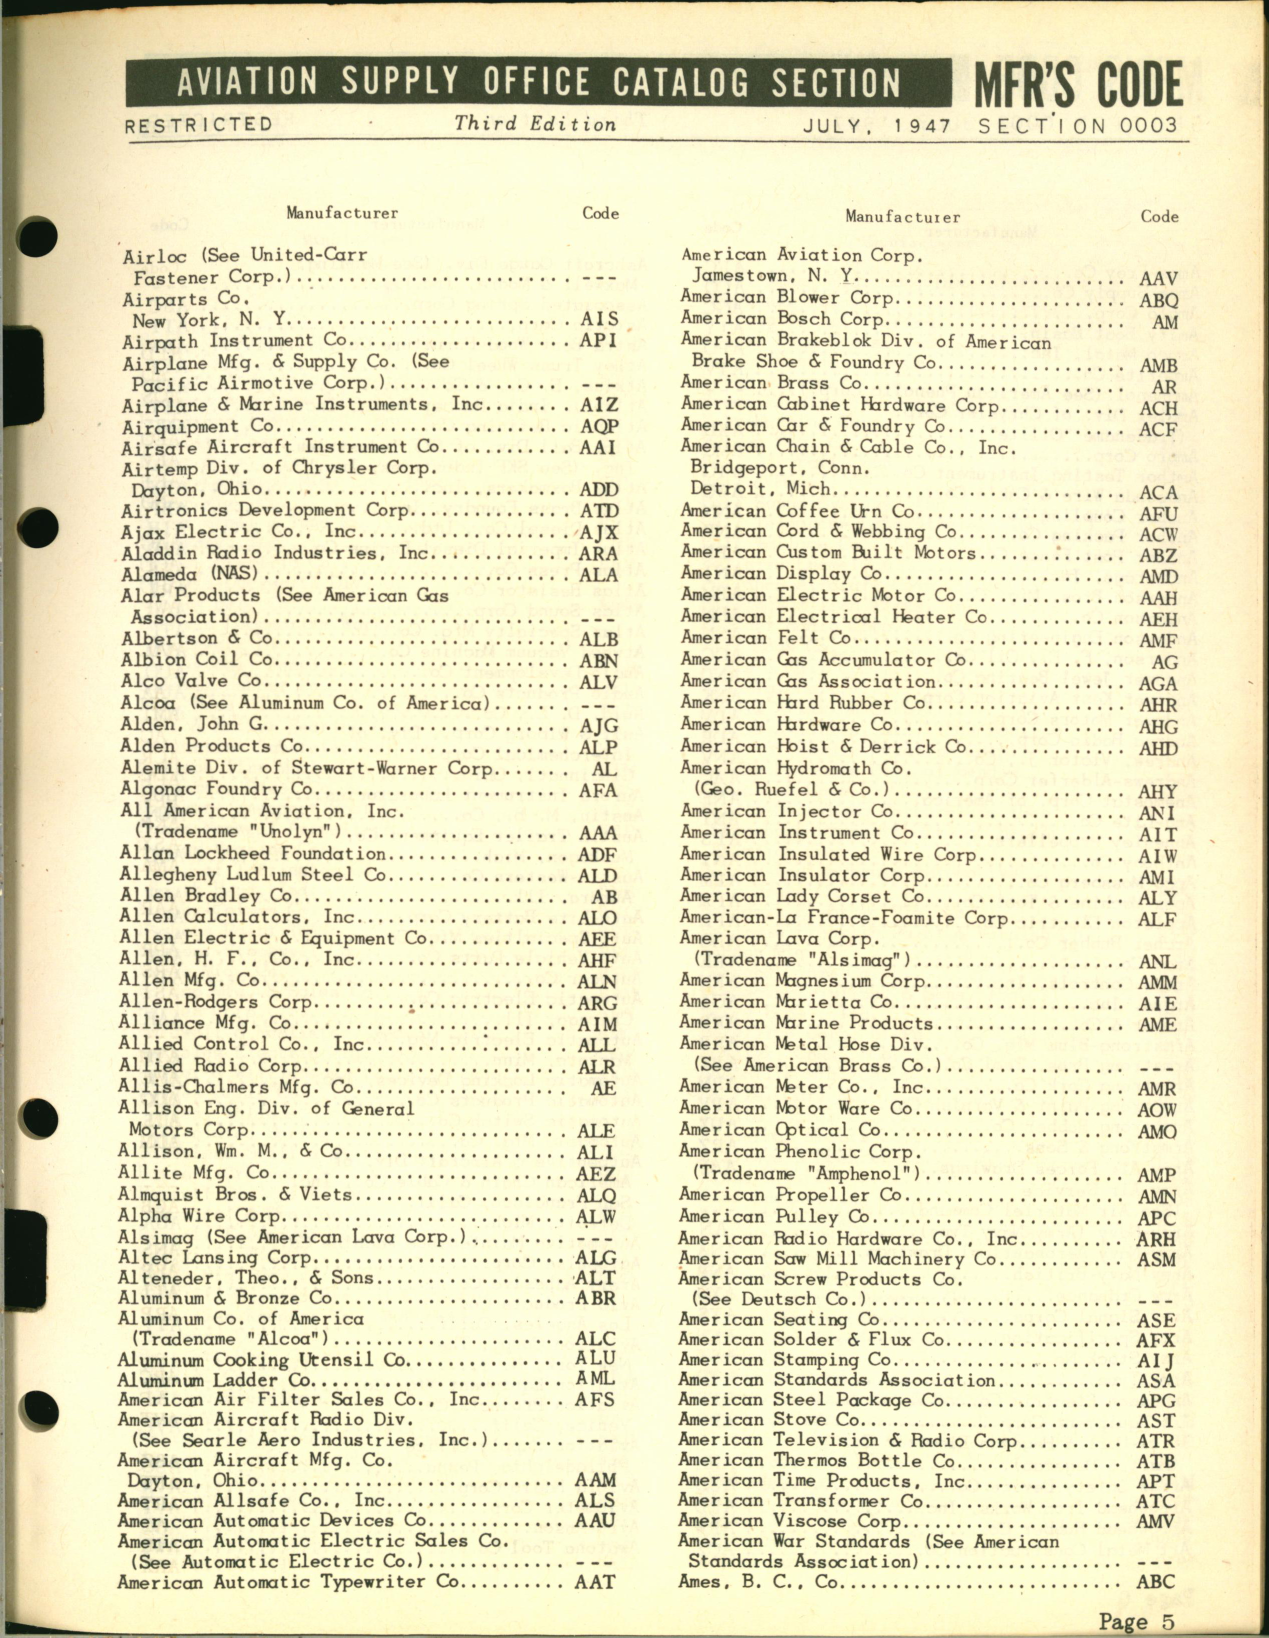 Sample page 5 from AirCorps Library document: Name of Code Index of Manufacturers of Aeronautical Material